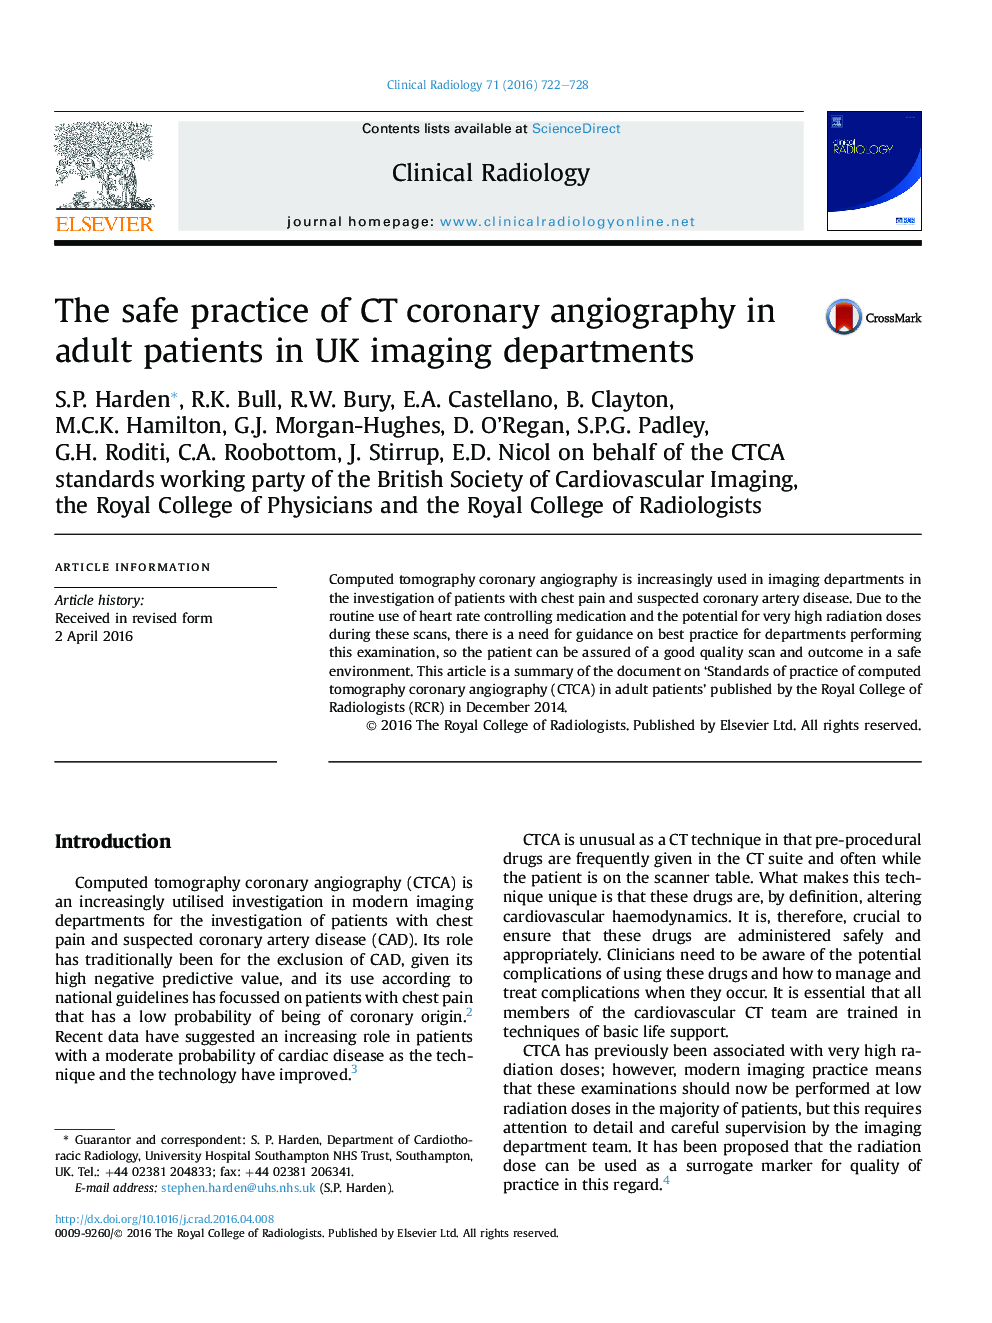 The safe practice of CT coronary angiography in adult patients in UK imaging departments